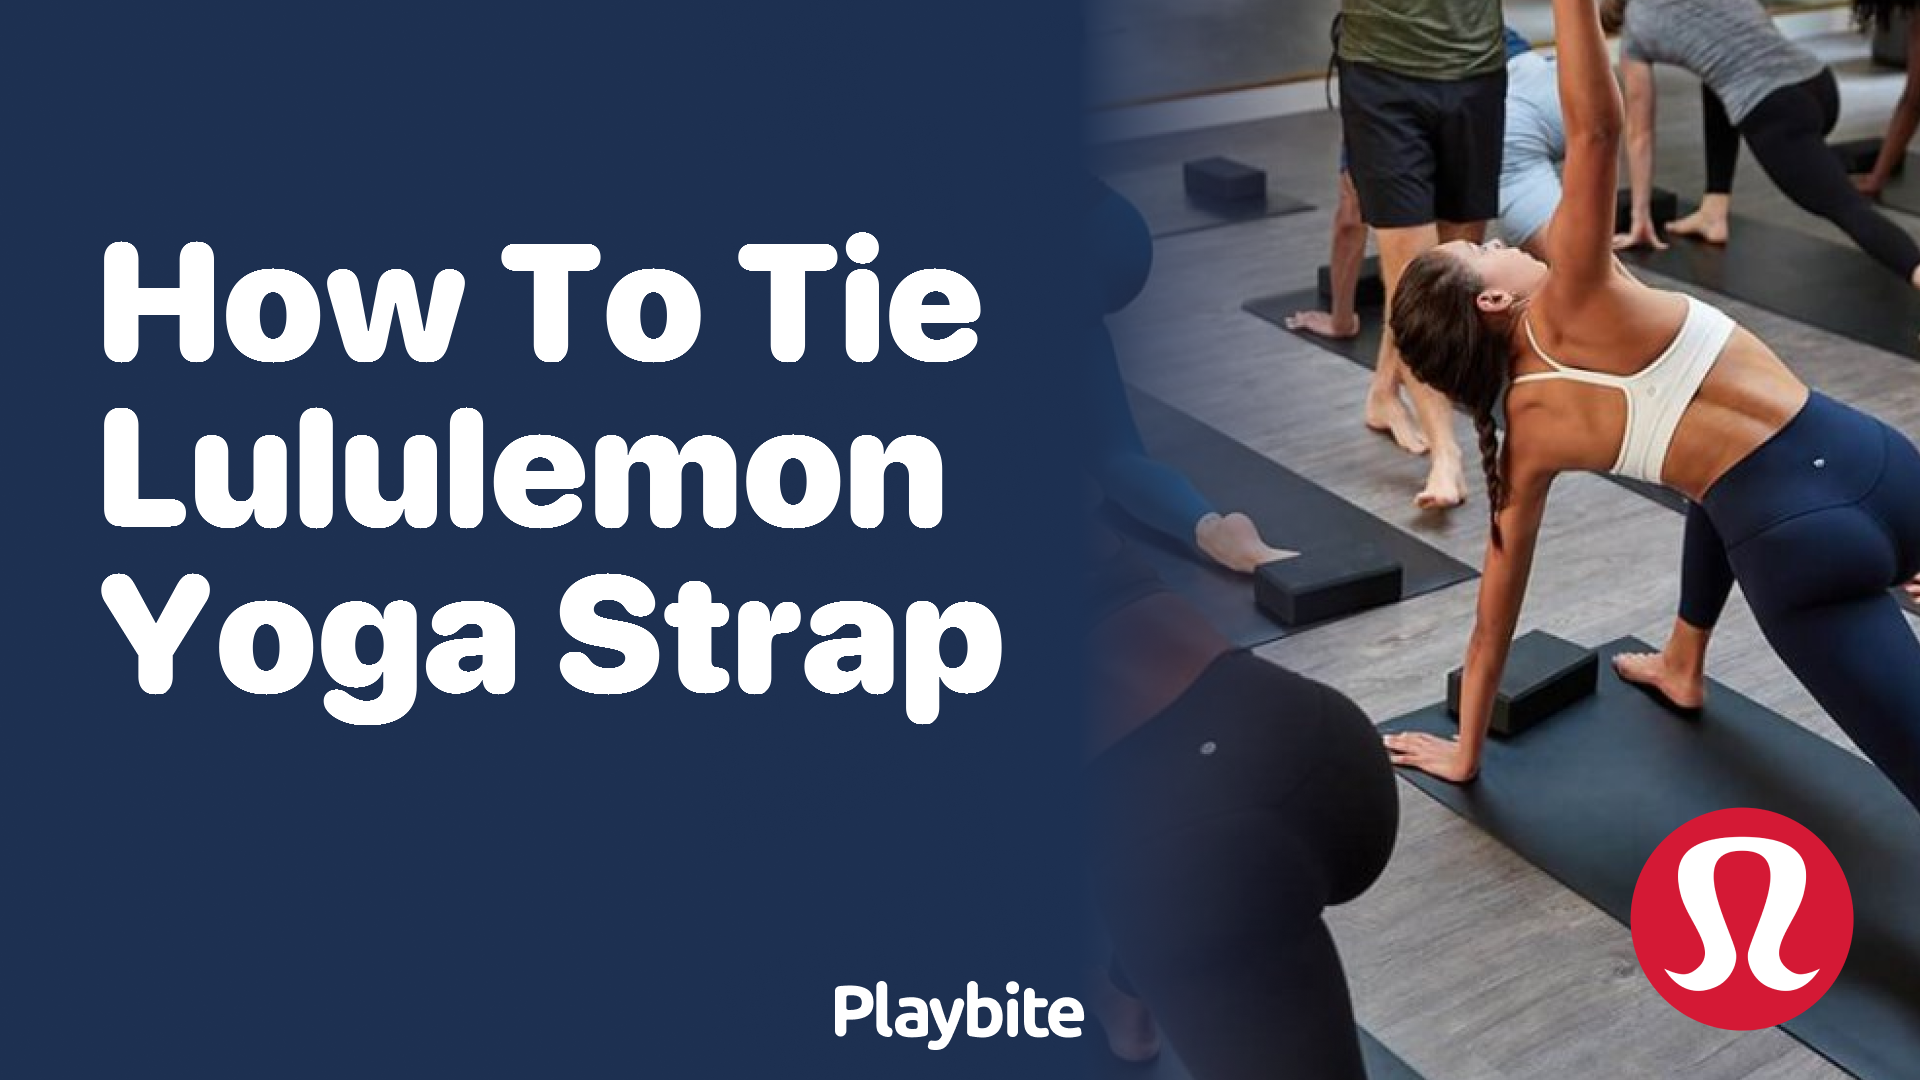 How to Tie a Lululemon Yoga Strap: A Quick Guide - Playbite